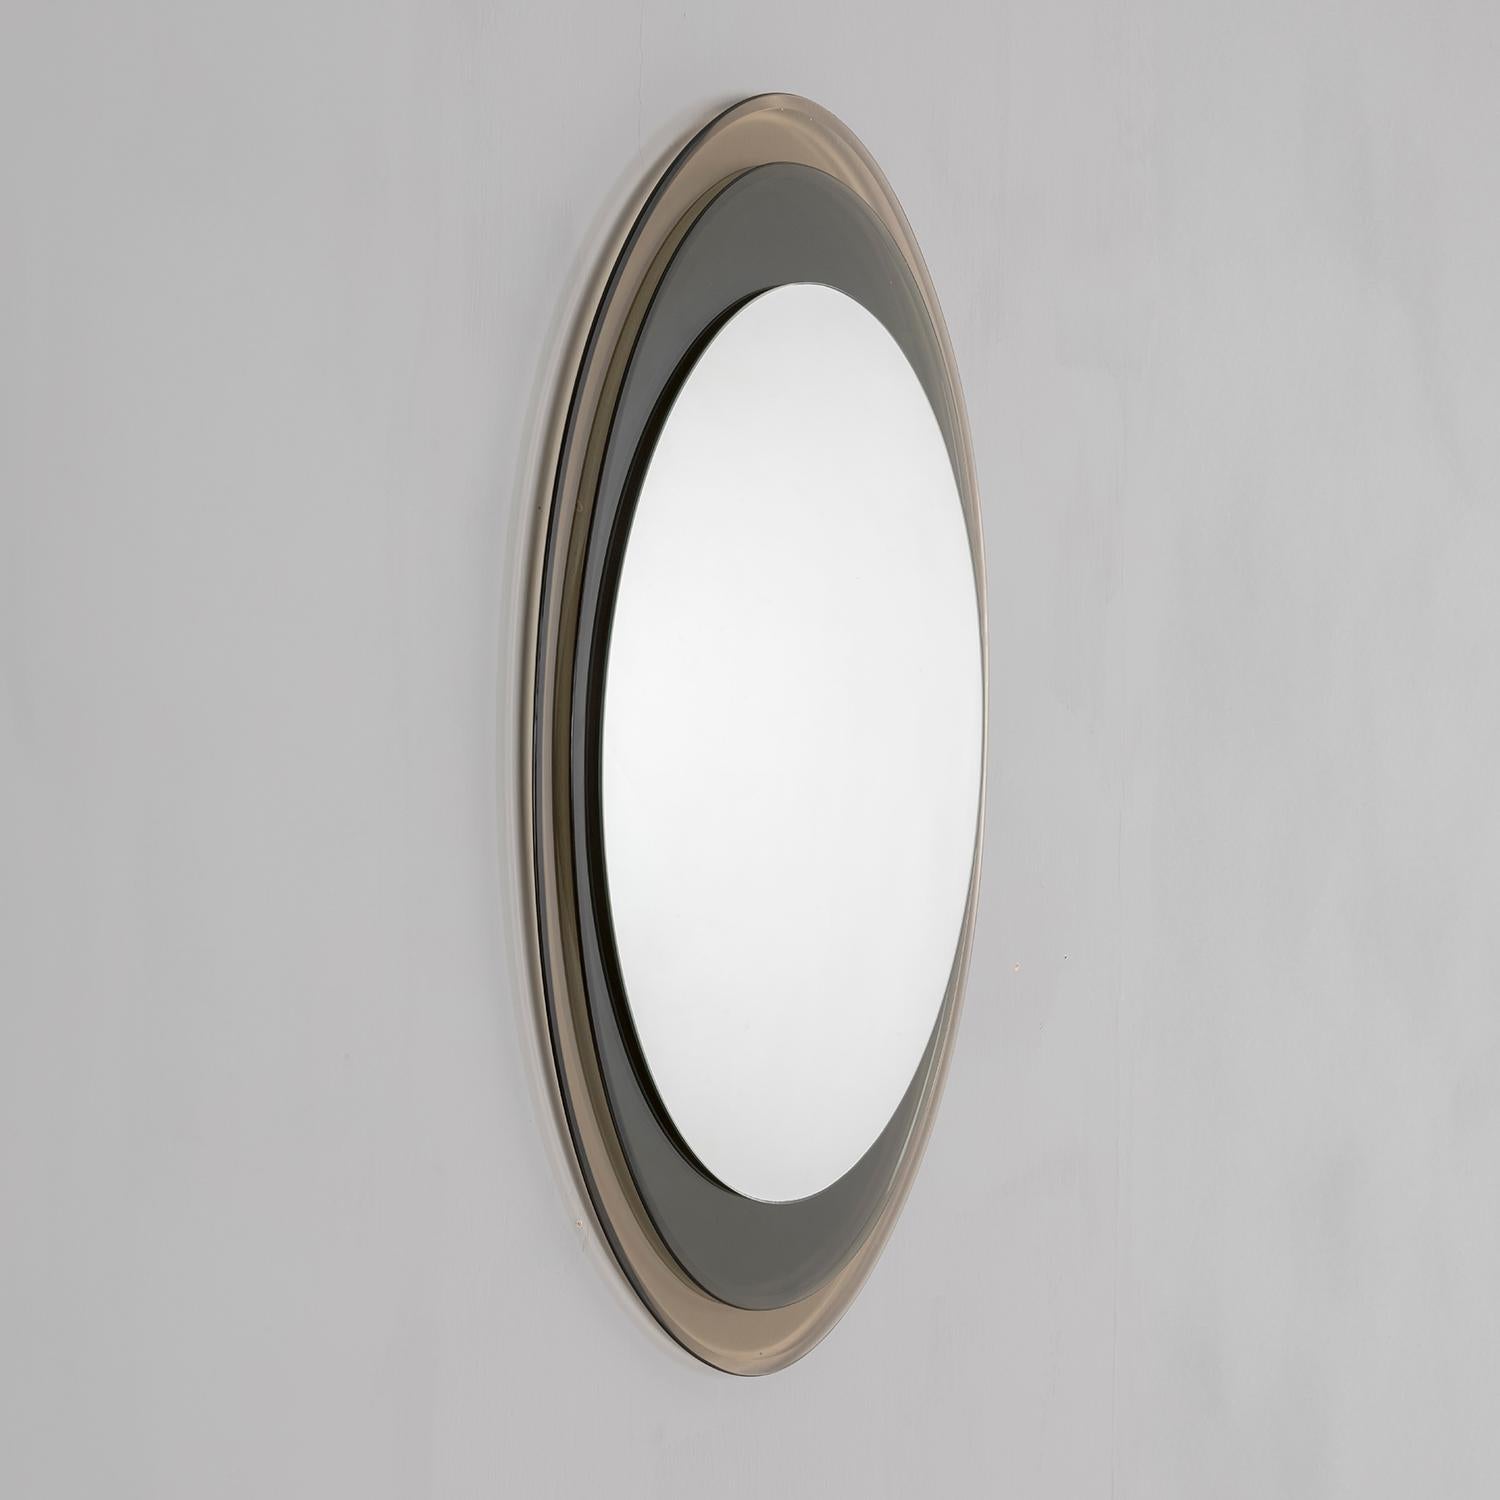 Wall mirror model 2046 designed in the 1960s by Max Ingrand and produced by Fontana Arte. An elegant overlay of gray and green glass sheets, the mirror can be hung either vertically or horizontally.